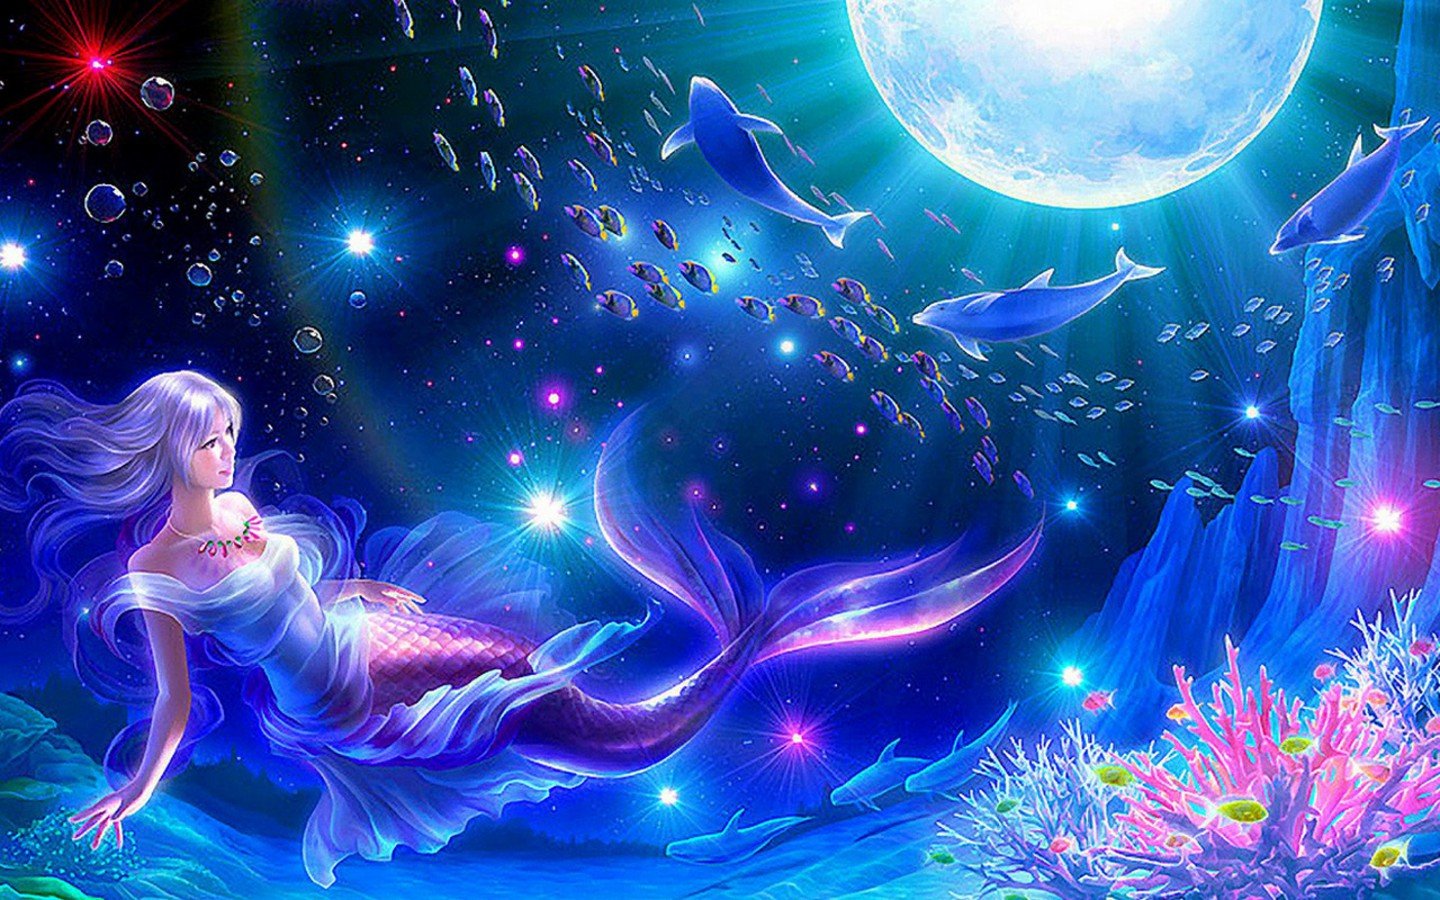 Beautiful Fantasy Girls HQ Free Wallpapers Download Size 1440x900